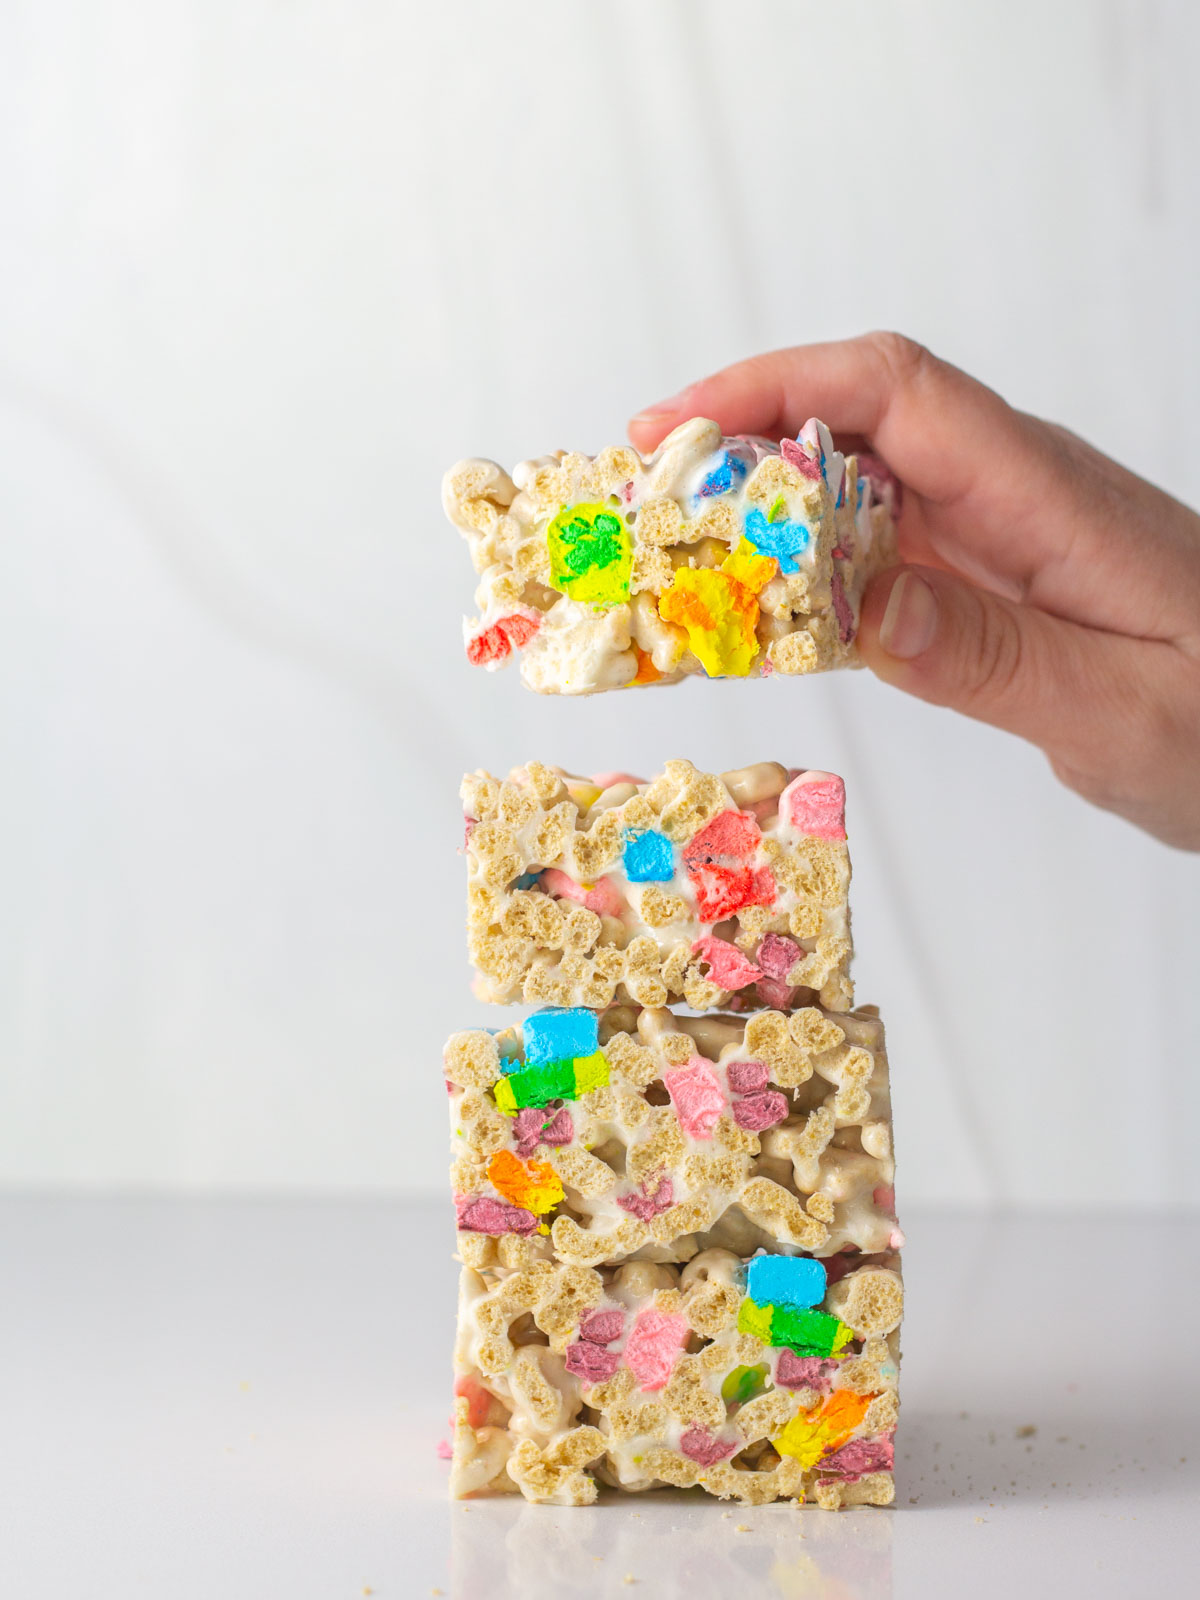 A hand placing a fourth lucky charms treat on a stack of three cereal bars.